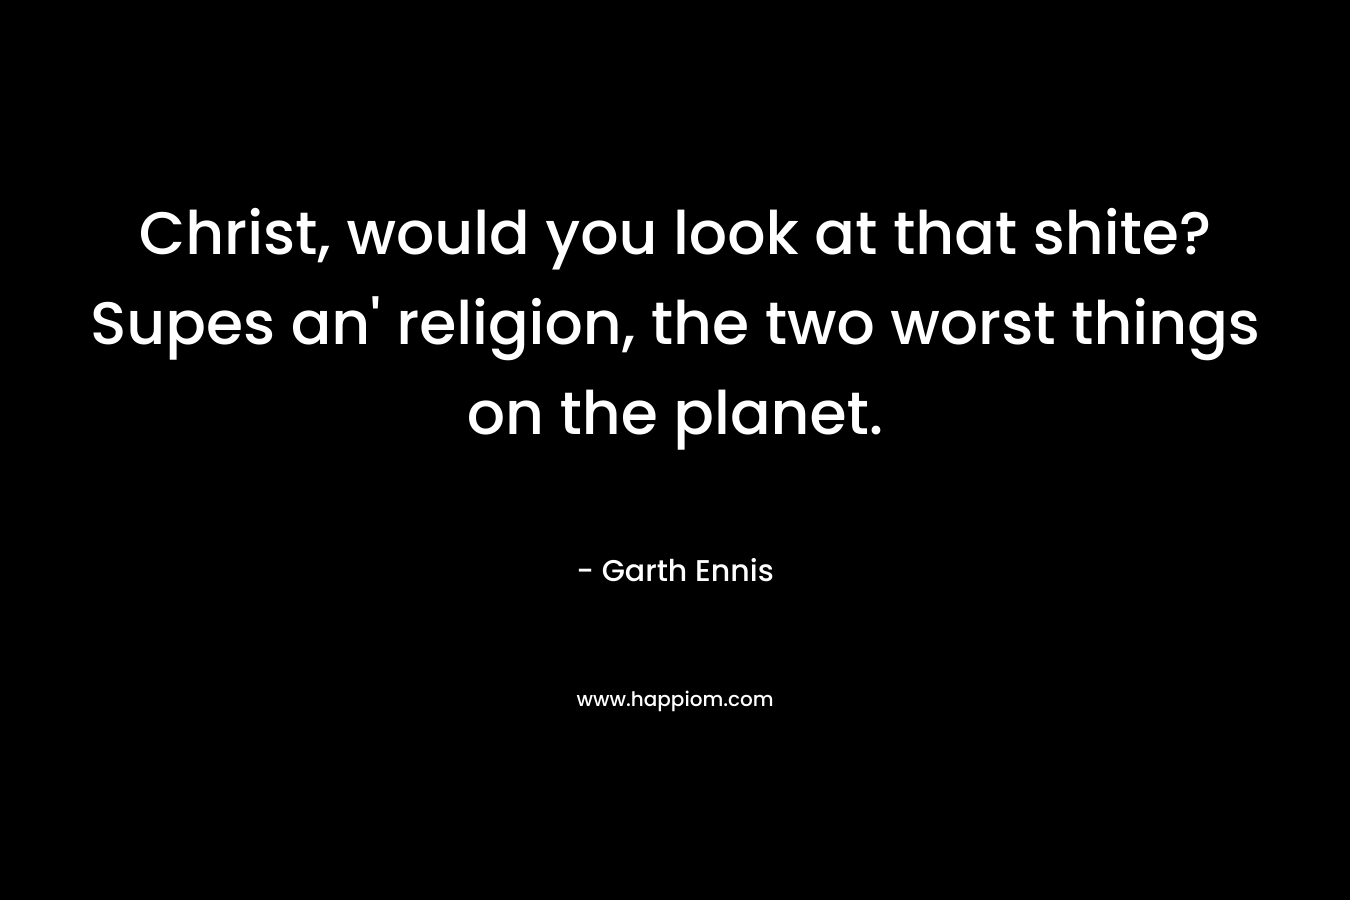 Christ, would you look at that shite? Supes an’ religion, the two worst things on the planet. – Garth Ennis